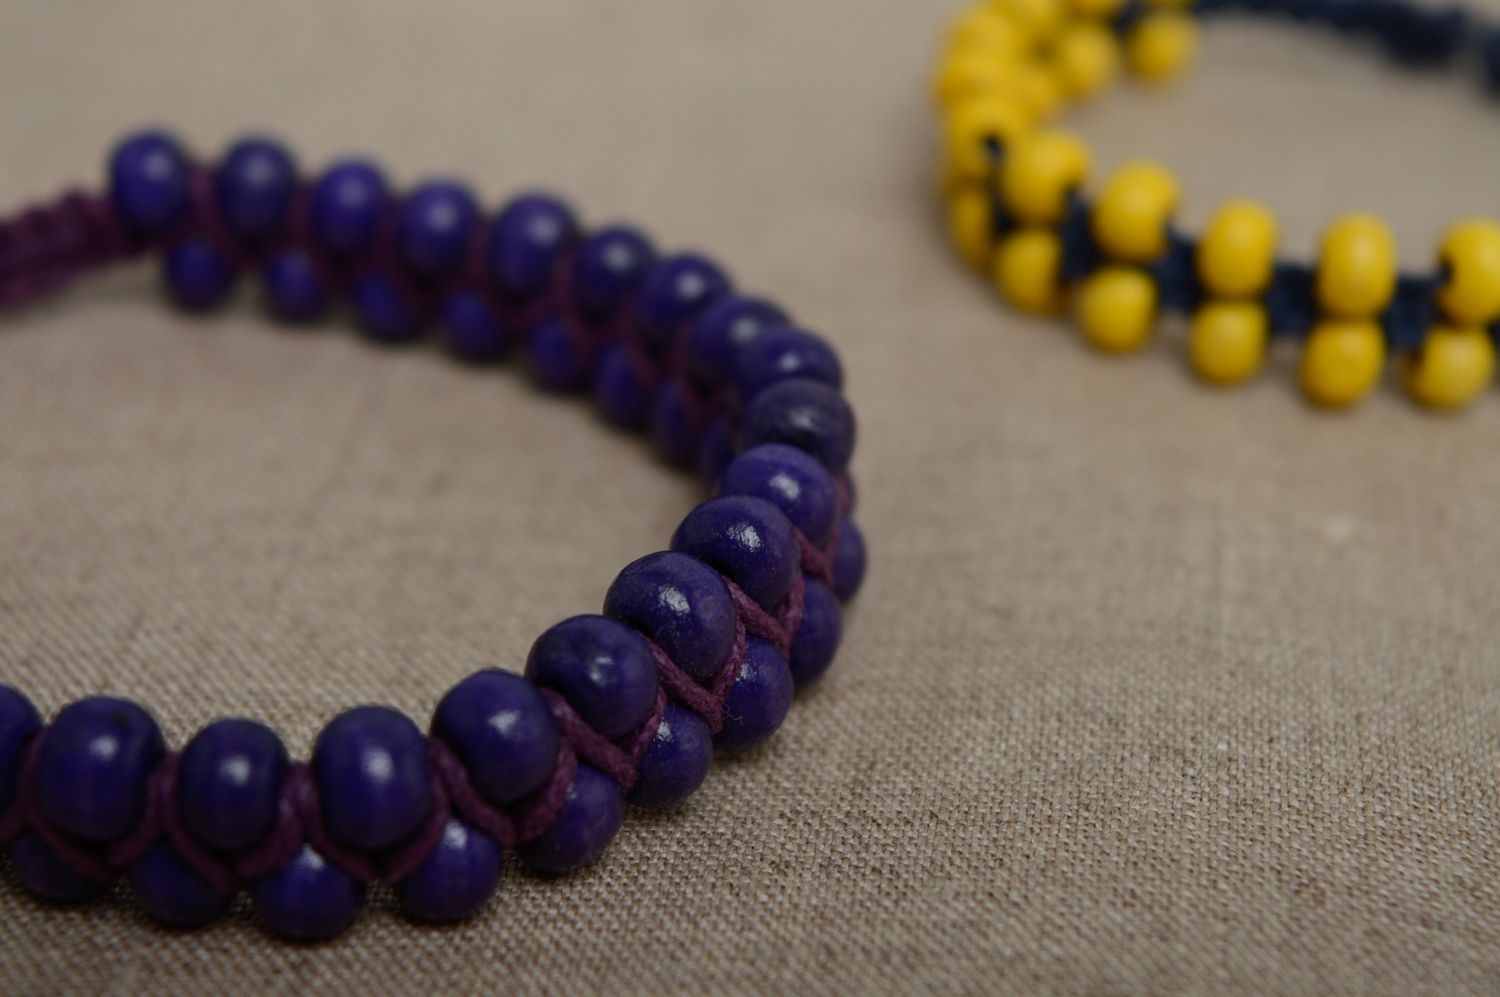 Violet macrame bracelet made of waxed cord and wooden beads photo 5